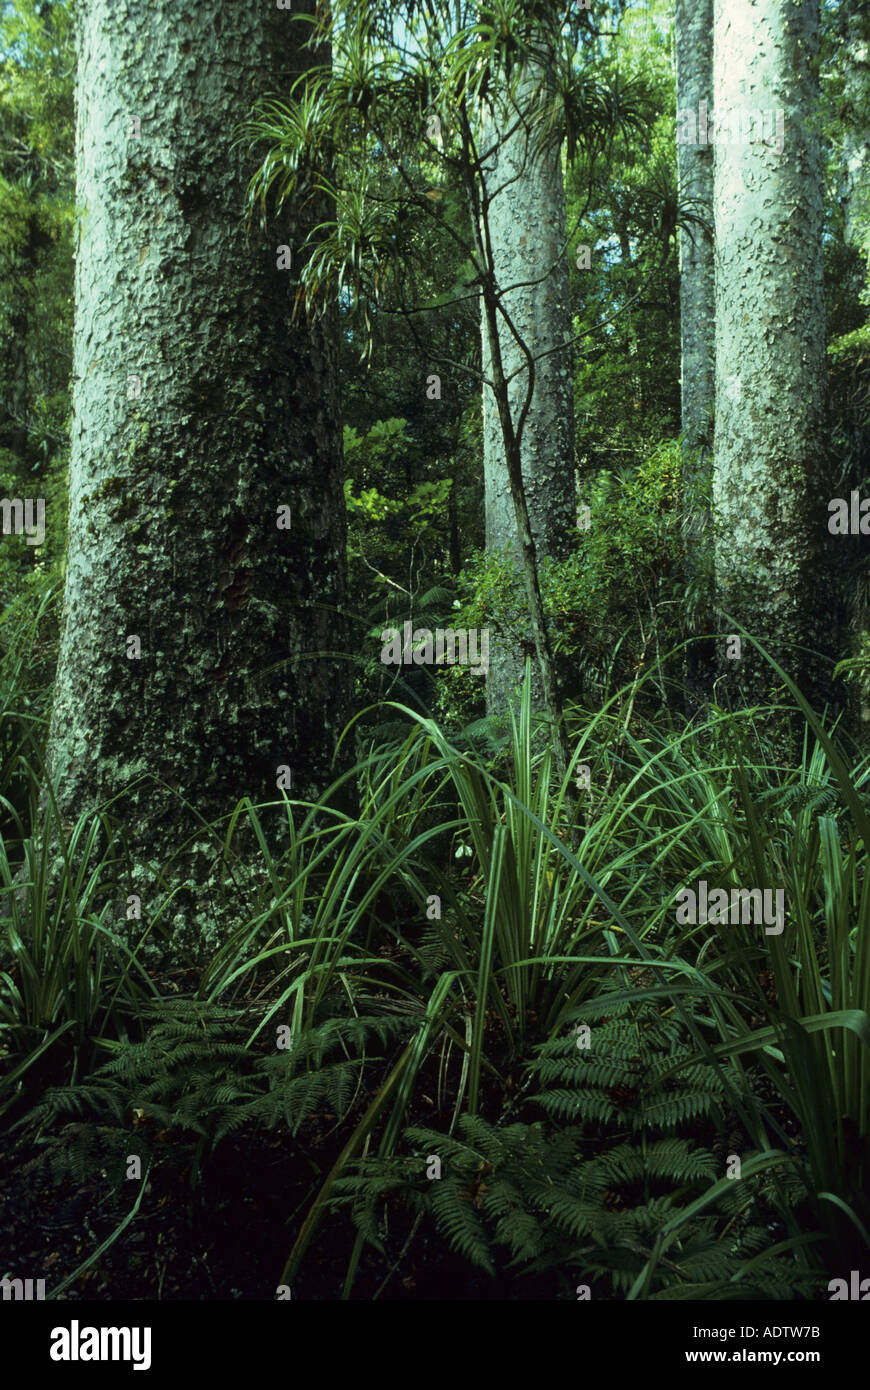 Tropical Forest Vegetation at base of trees Kauri Forest Agathis australis New Zealand Stock Photo